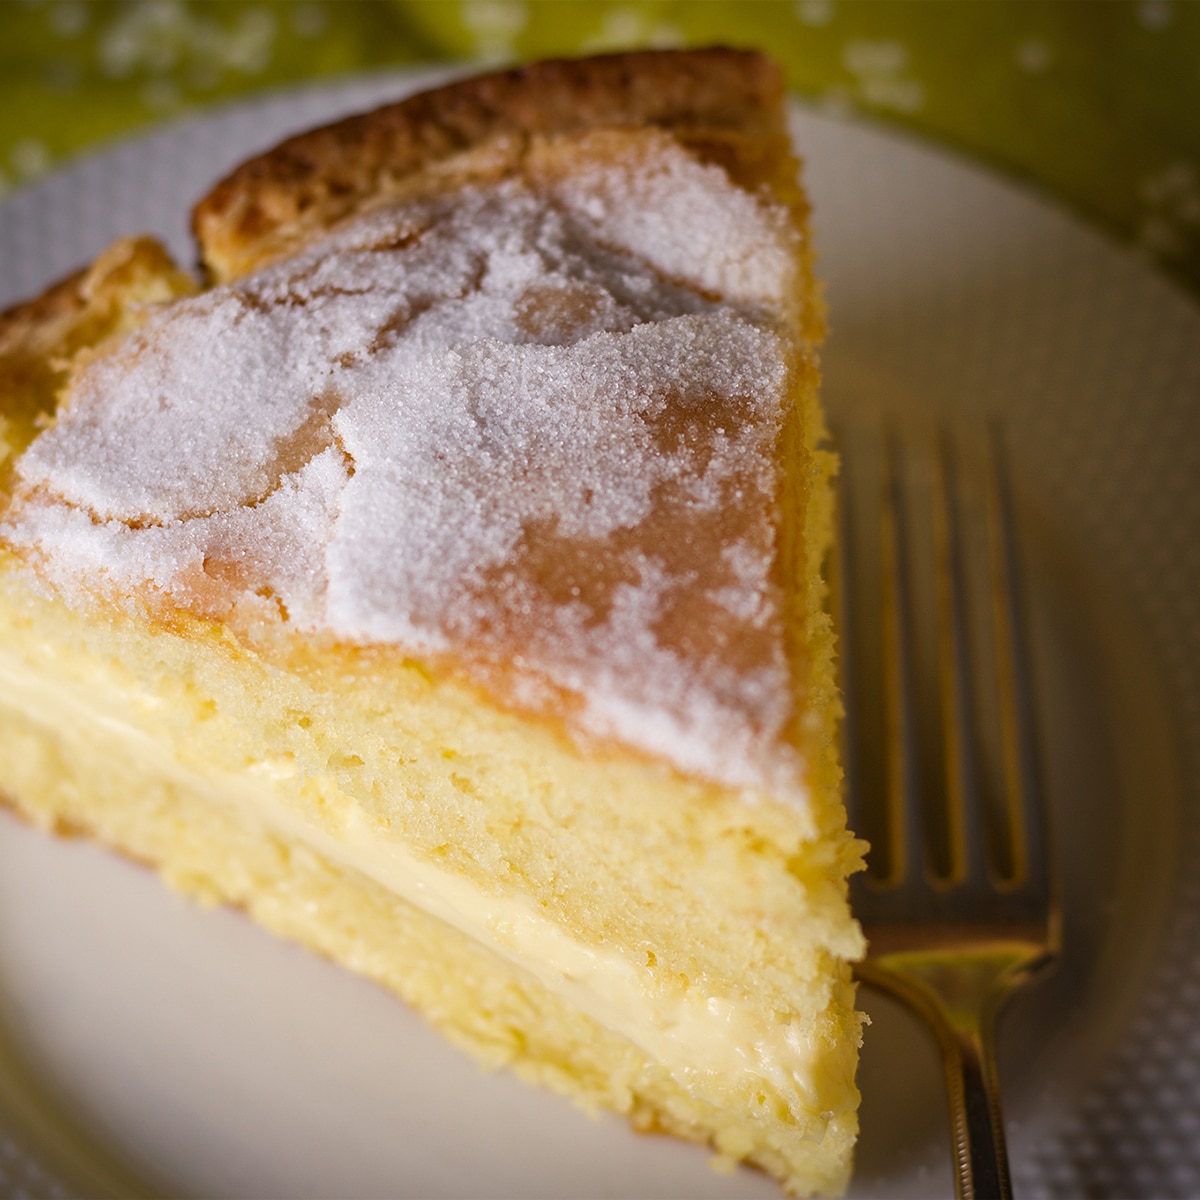 A slice of olive oil cake with a sugary top that's been filled with mascarpone pastry cream.